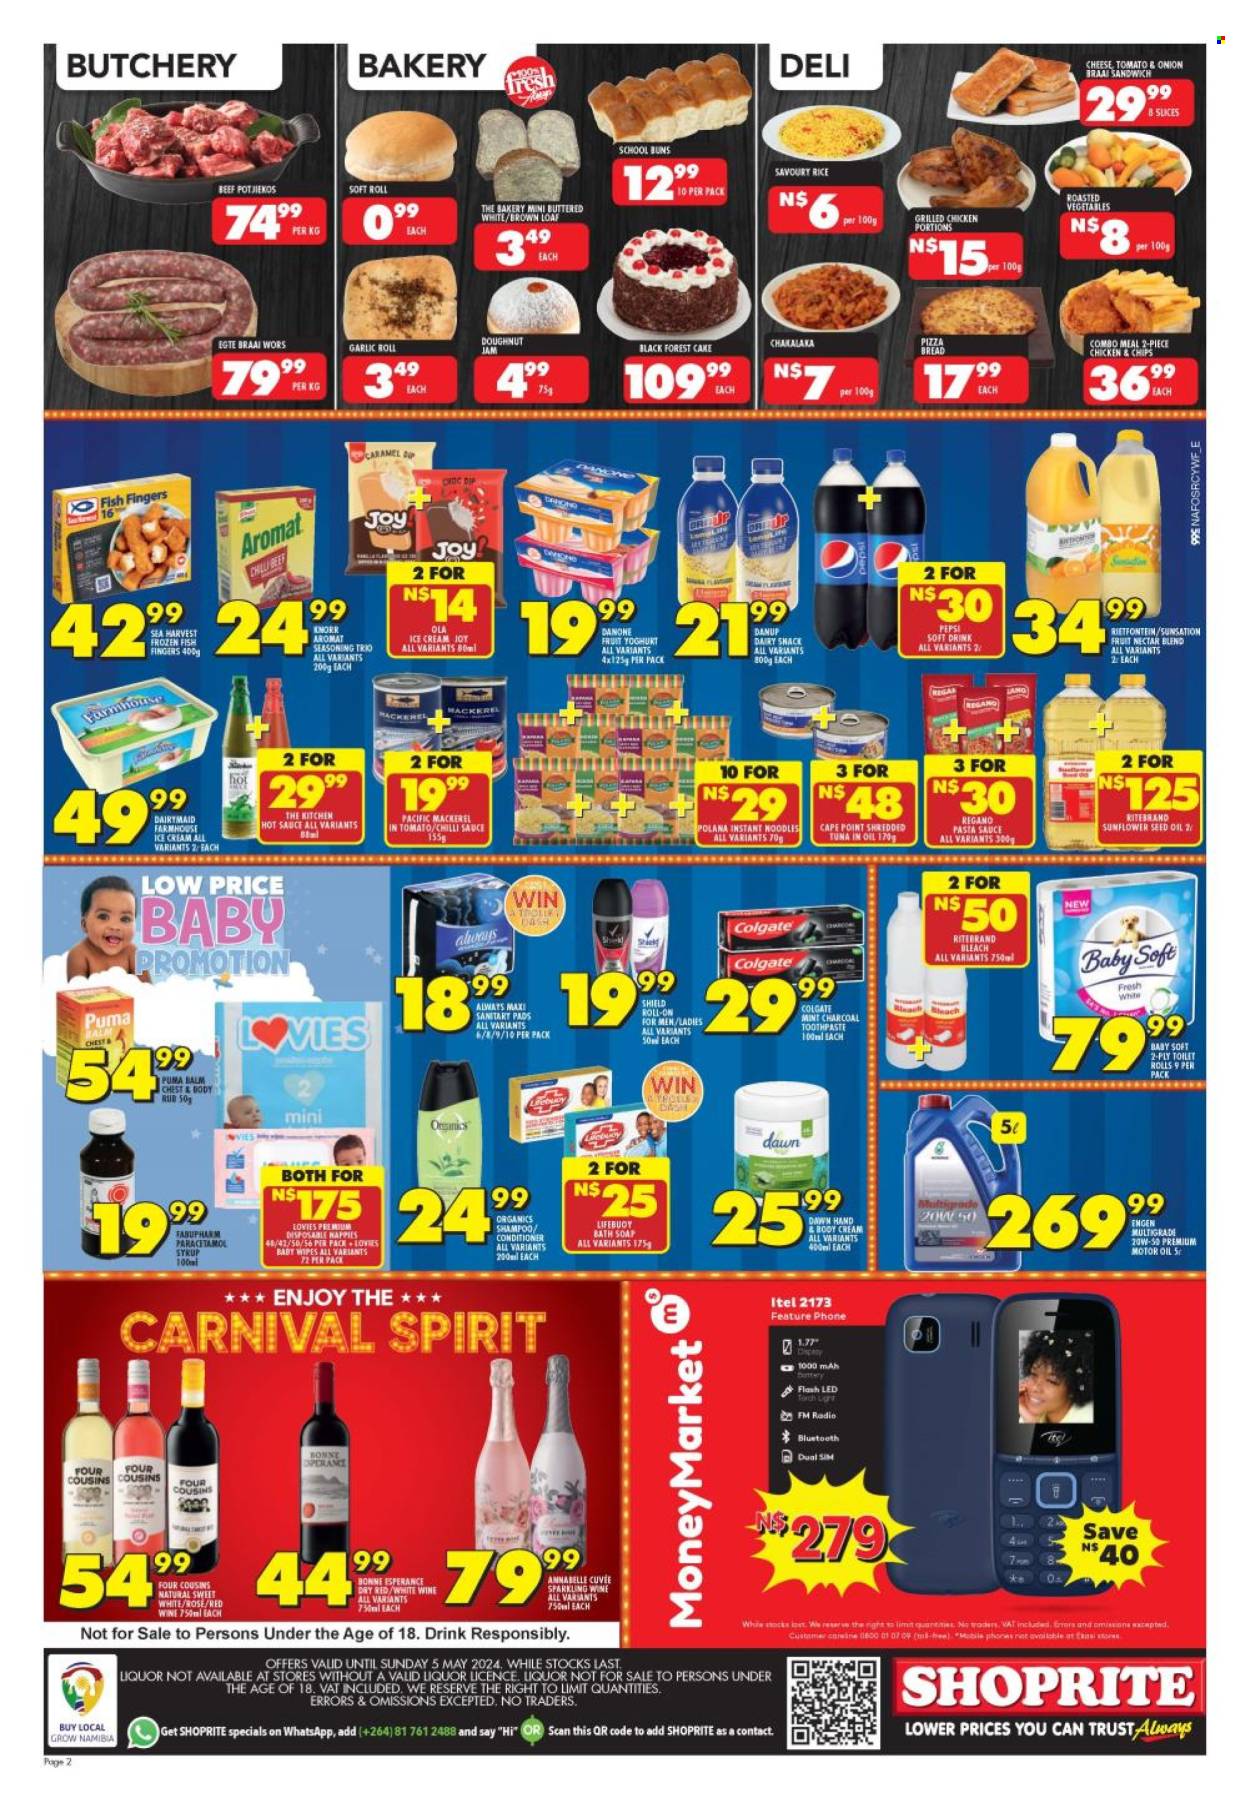 thumbnail - Shoprite catalogue  - 22/04/2024 - 05/05/2024 - Sales products - bread, buns, garlic roll, pizza bread, donut, mackerel, tuna, Sea Harvest, pasta sauce, sandwich, instant noodles, Knorr, fish fingers, chakalaka, noodles, spaghetti sauce, braai wors, Danone, dip, ice cream, rice, spice, seasoning, hot sauce, sunflower oil, syrup, jam, Pepsi, fruit nectar, soft drink, carbonated soft drink, sparkling wine, white wine, Cuvée, alcohol, spirit, wipes, baby wipes, Baby Soft, toilet paper, pads, bleach, shampoo, soap, Lifebuoy, Colgate, toothpaste, sanitary pads, conditioner, body cream. Page 2.